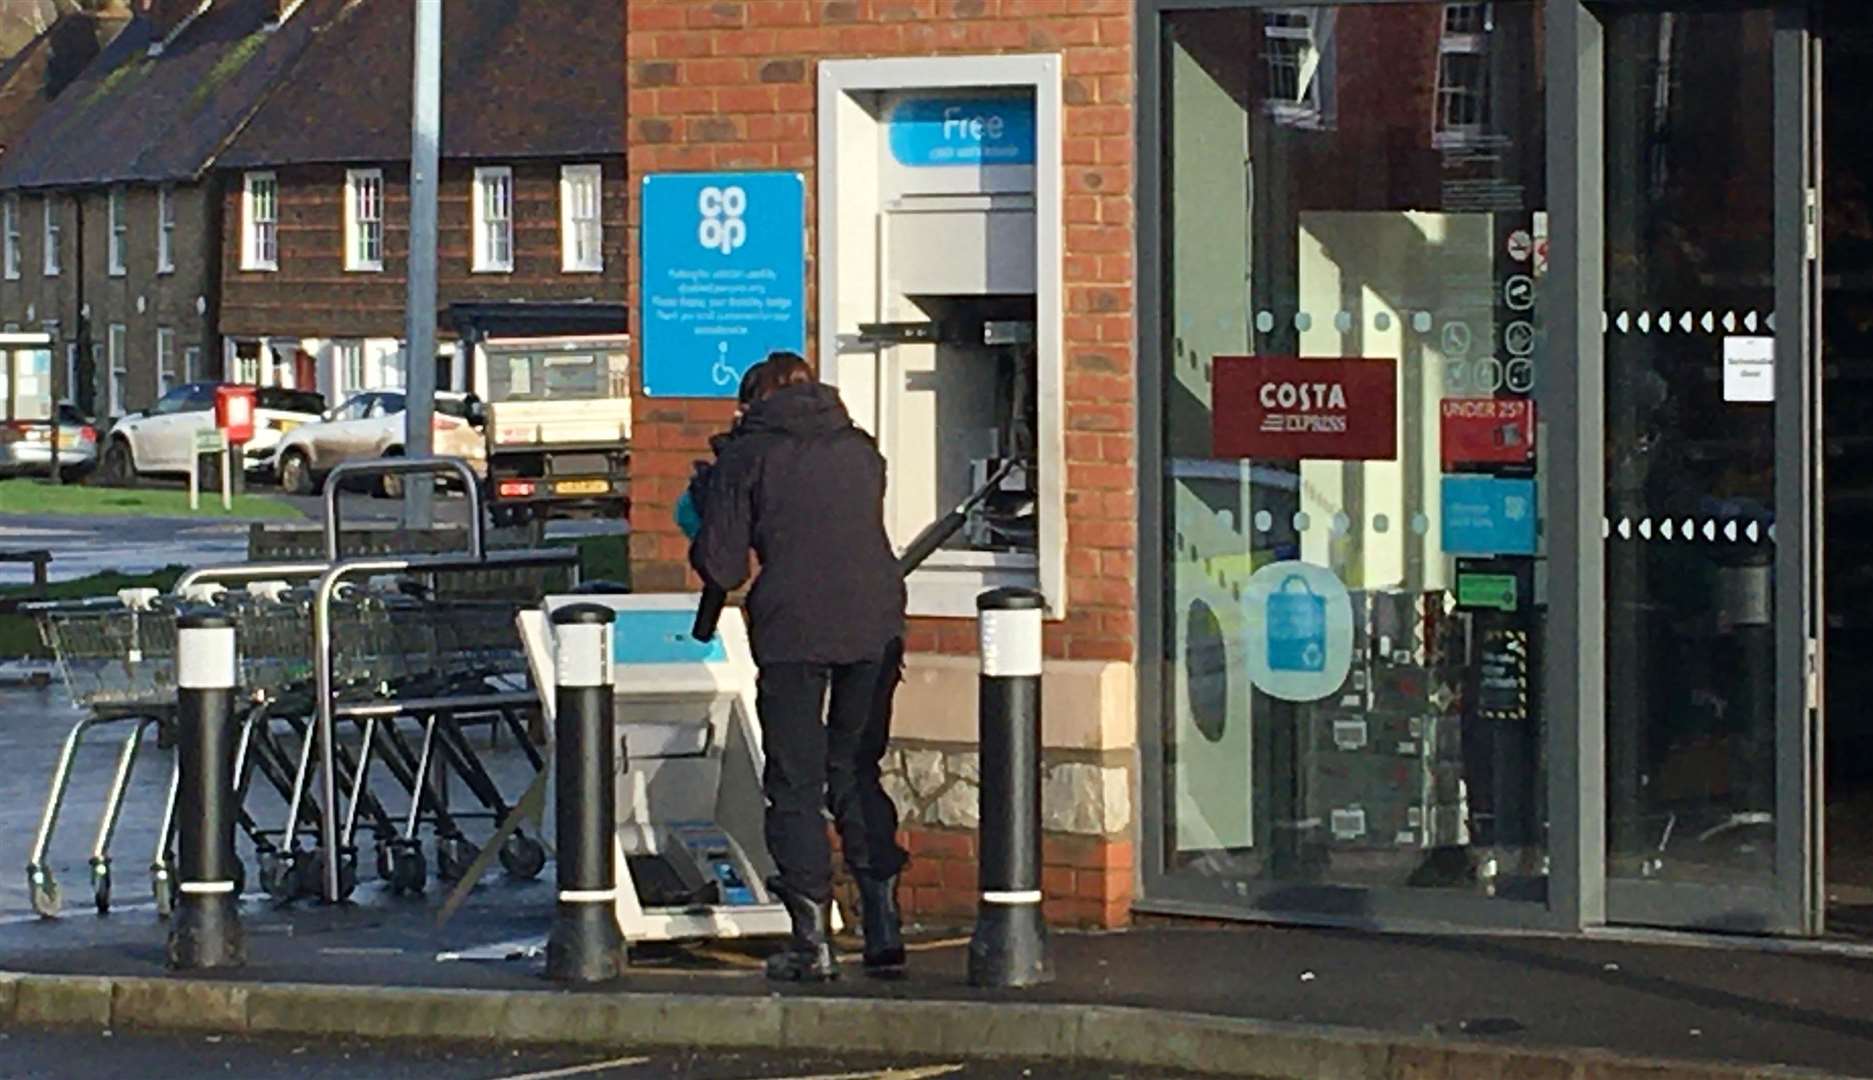 A forensic officer examiner the cash machine after an attempted theft in Harrietsham